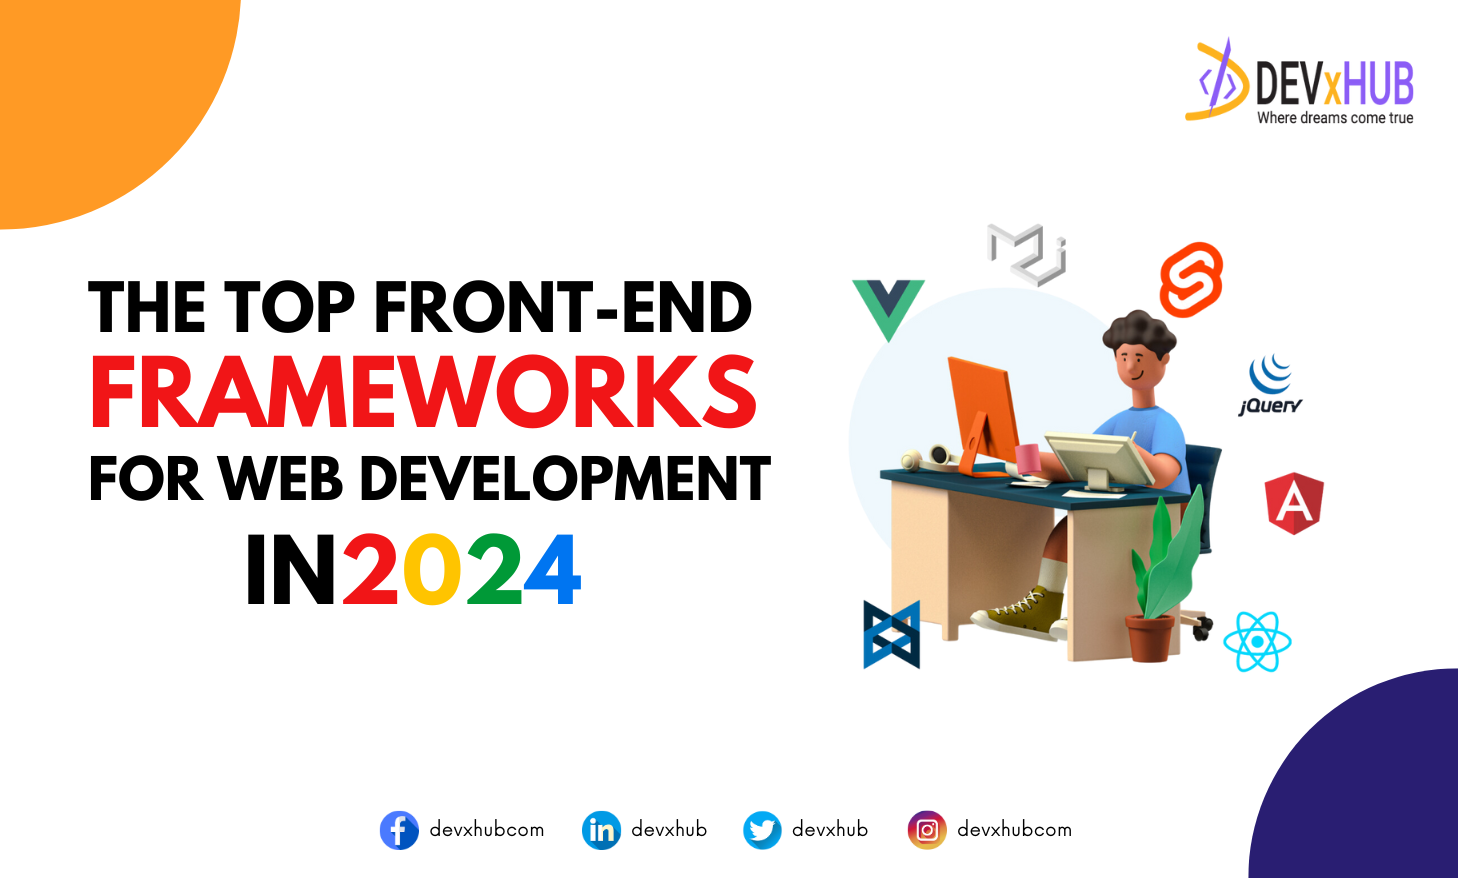 The Top Front-end Frameworks for Web Development in 2024